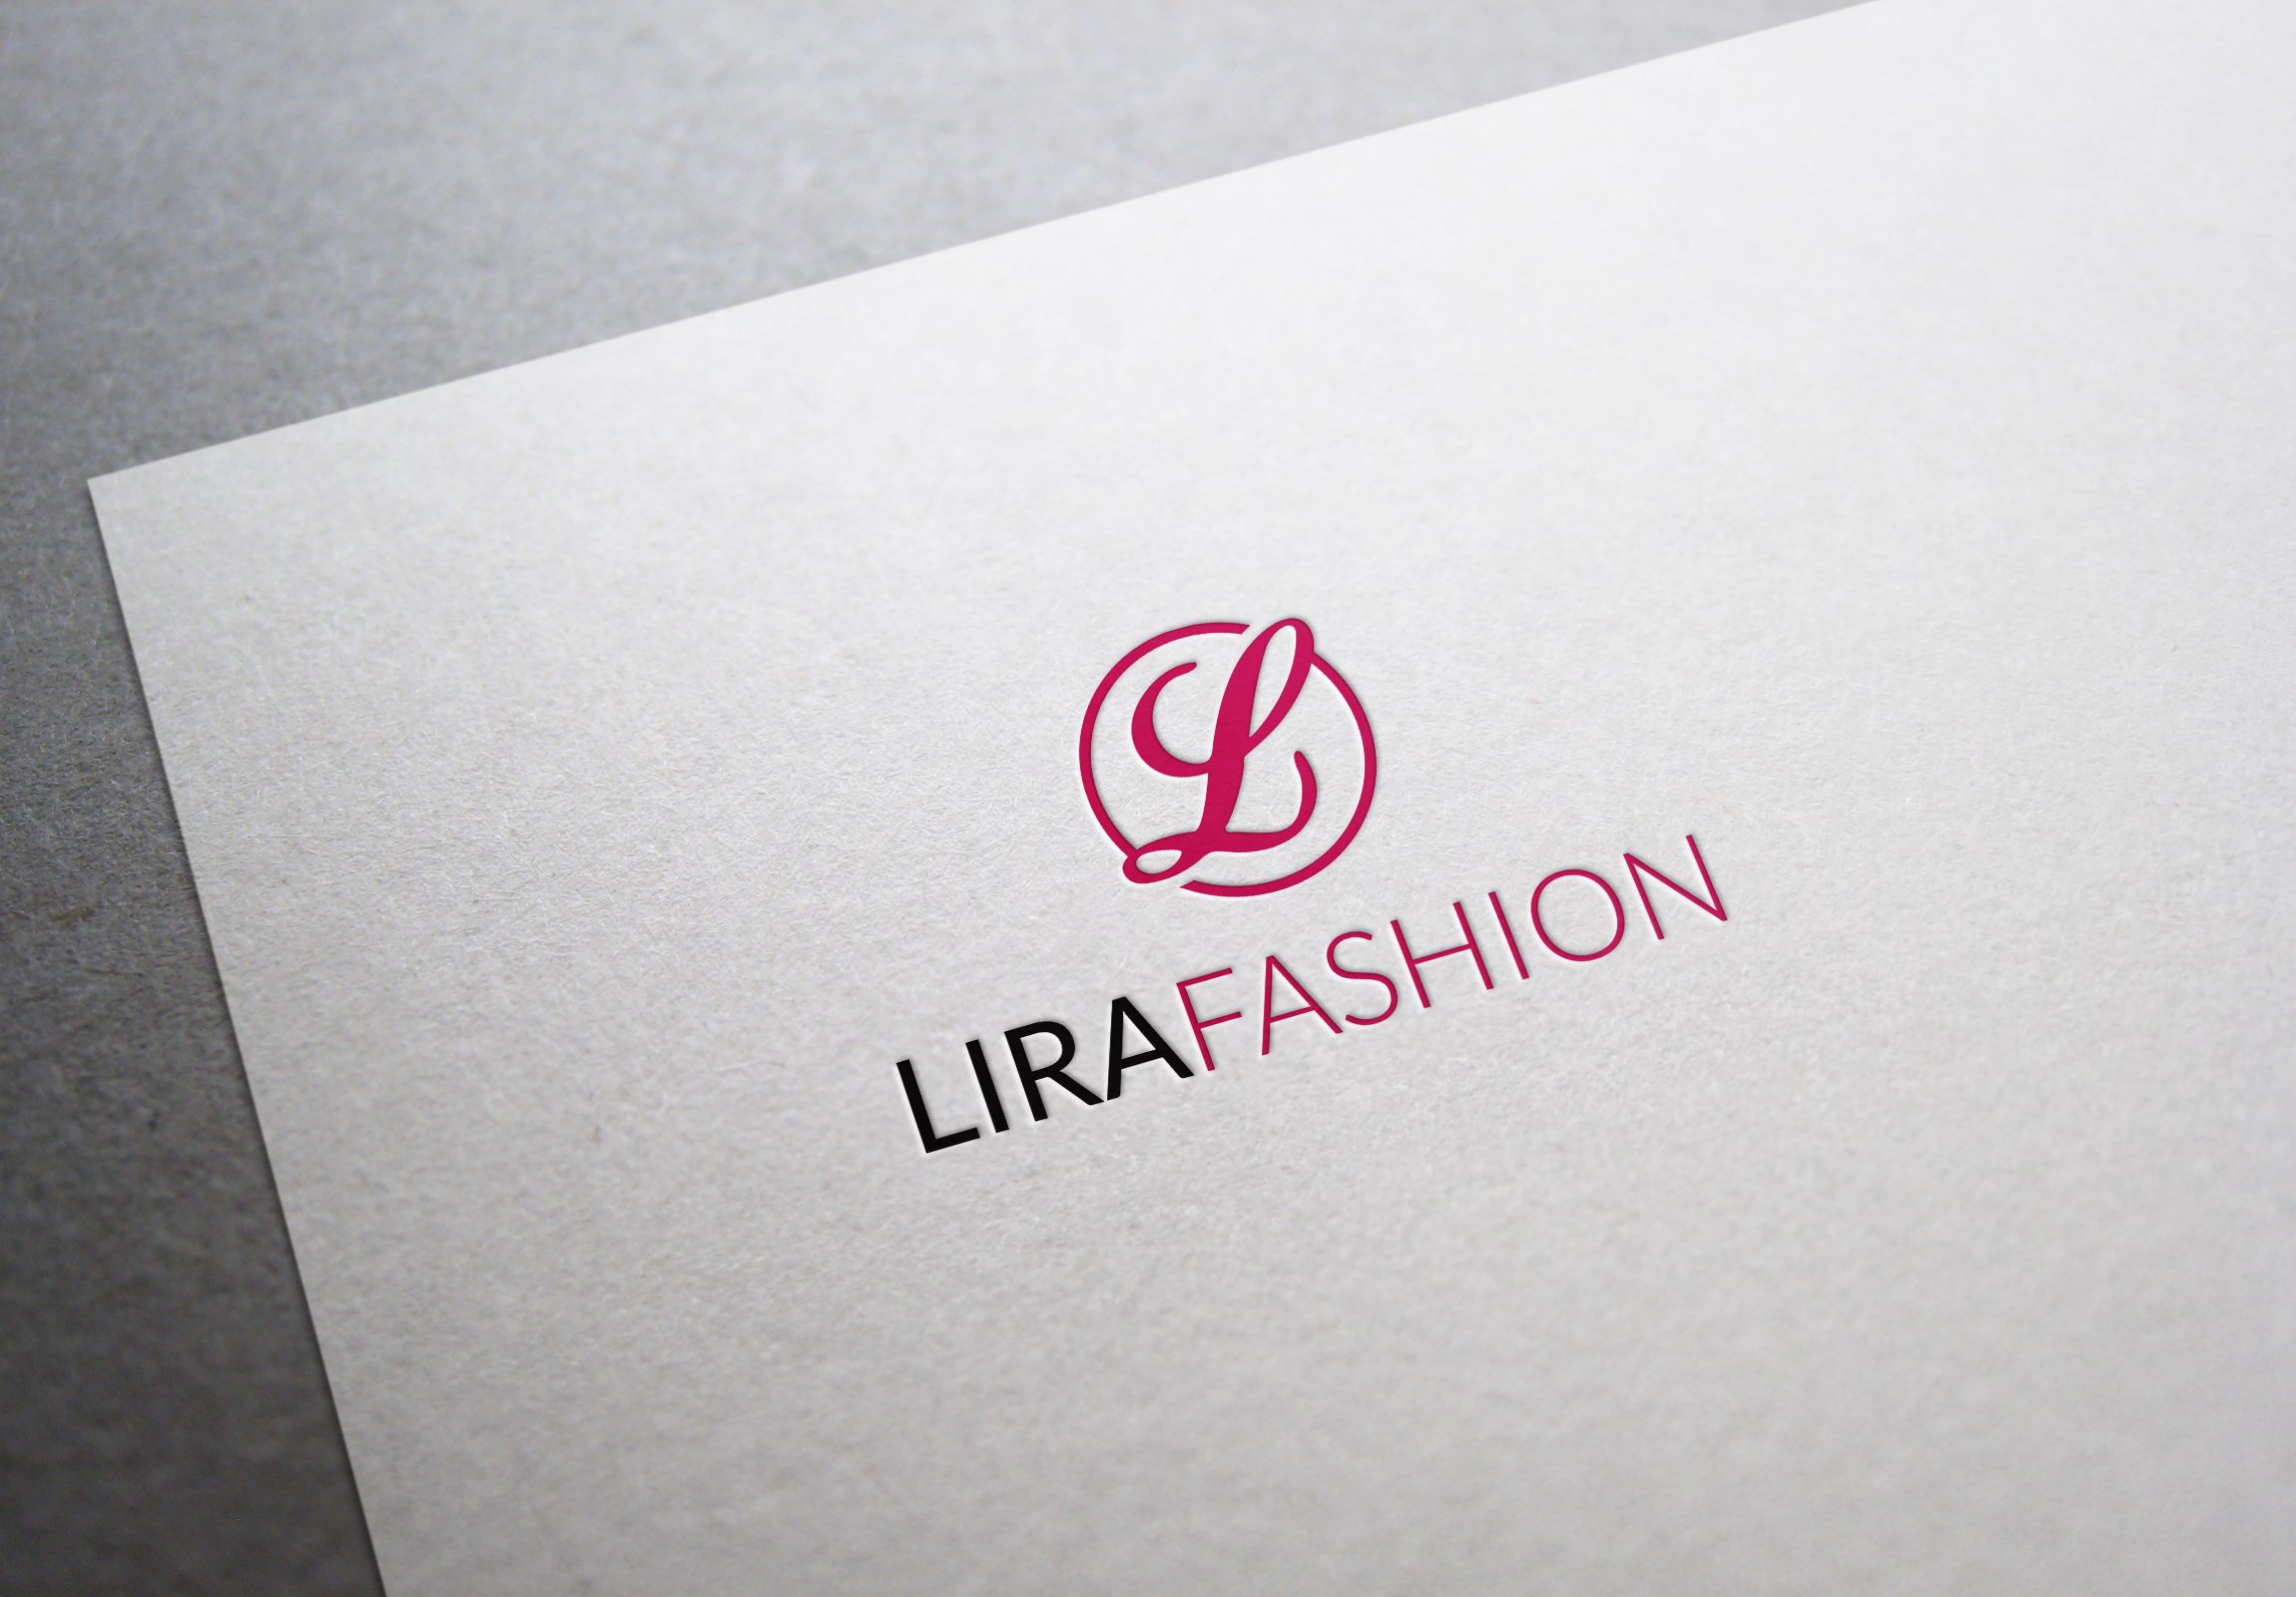 White paper with pink logo and bicolor lettering.